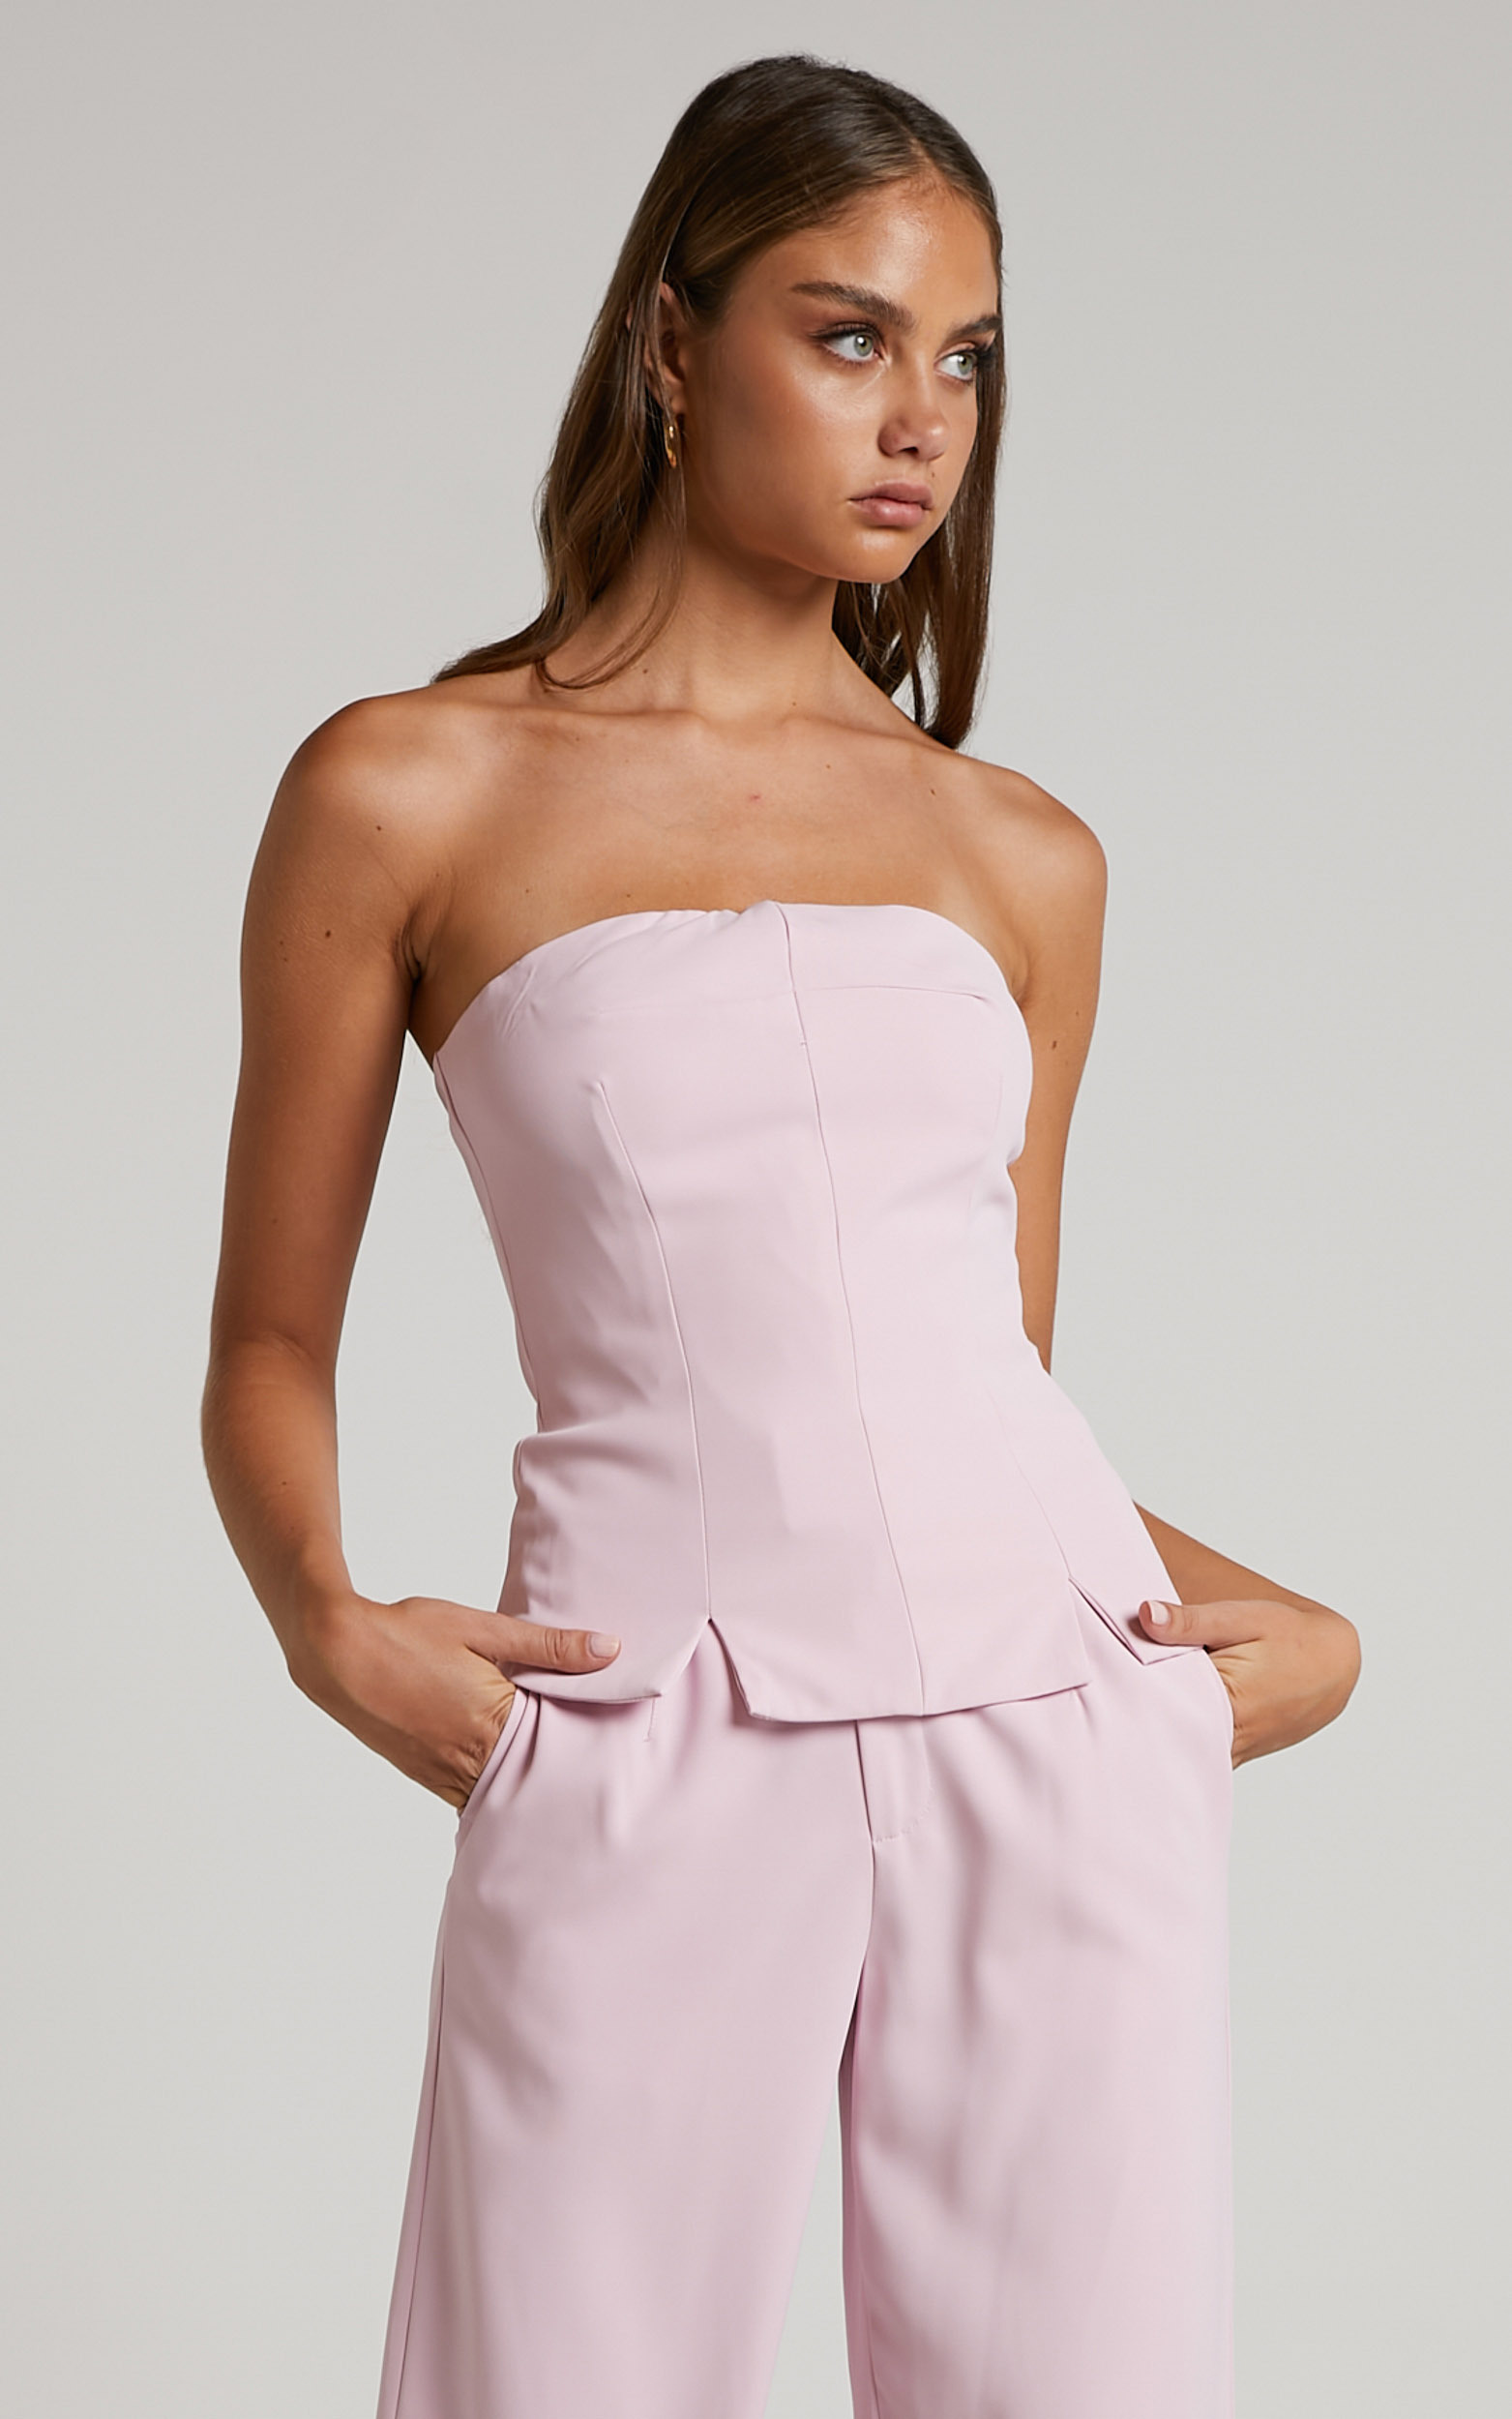 Mhina Top - Strapless Double Split Bustier Top in Pink - 06, PNK1, hi-res image number null